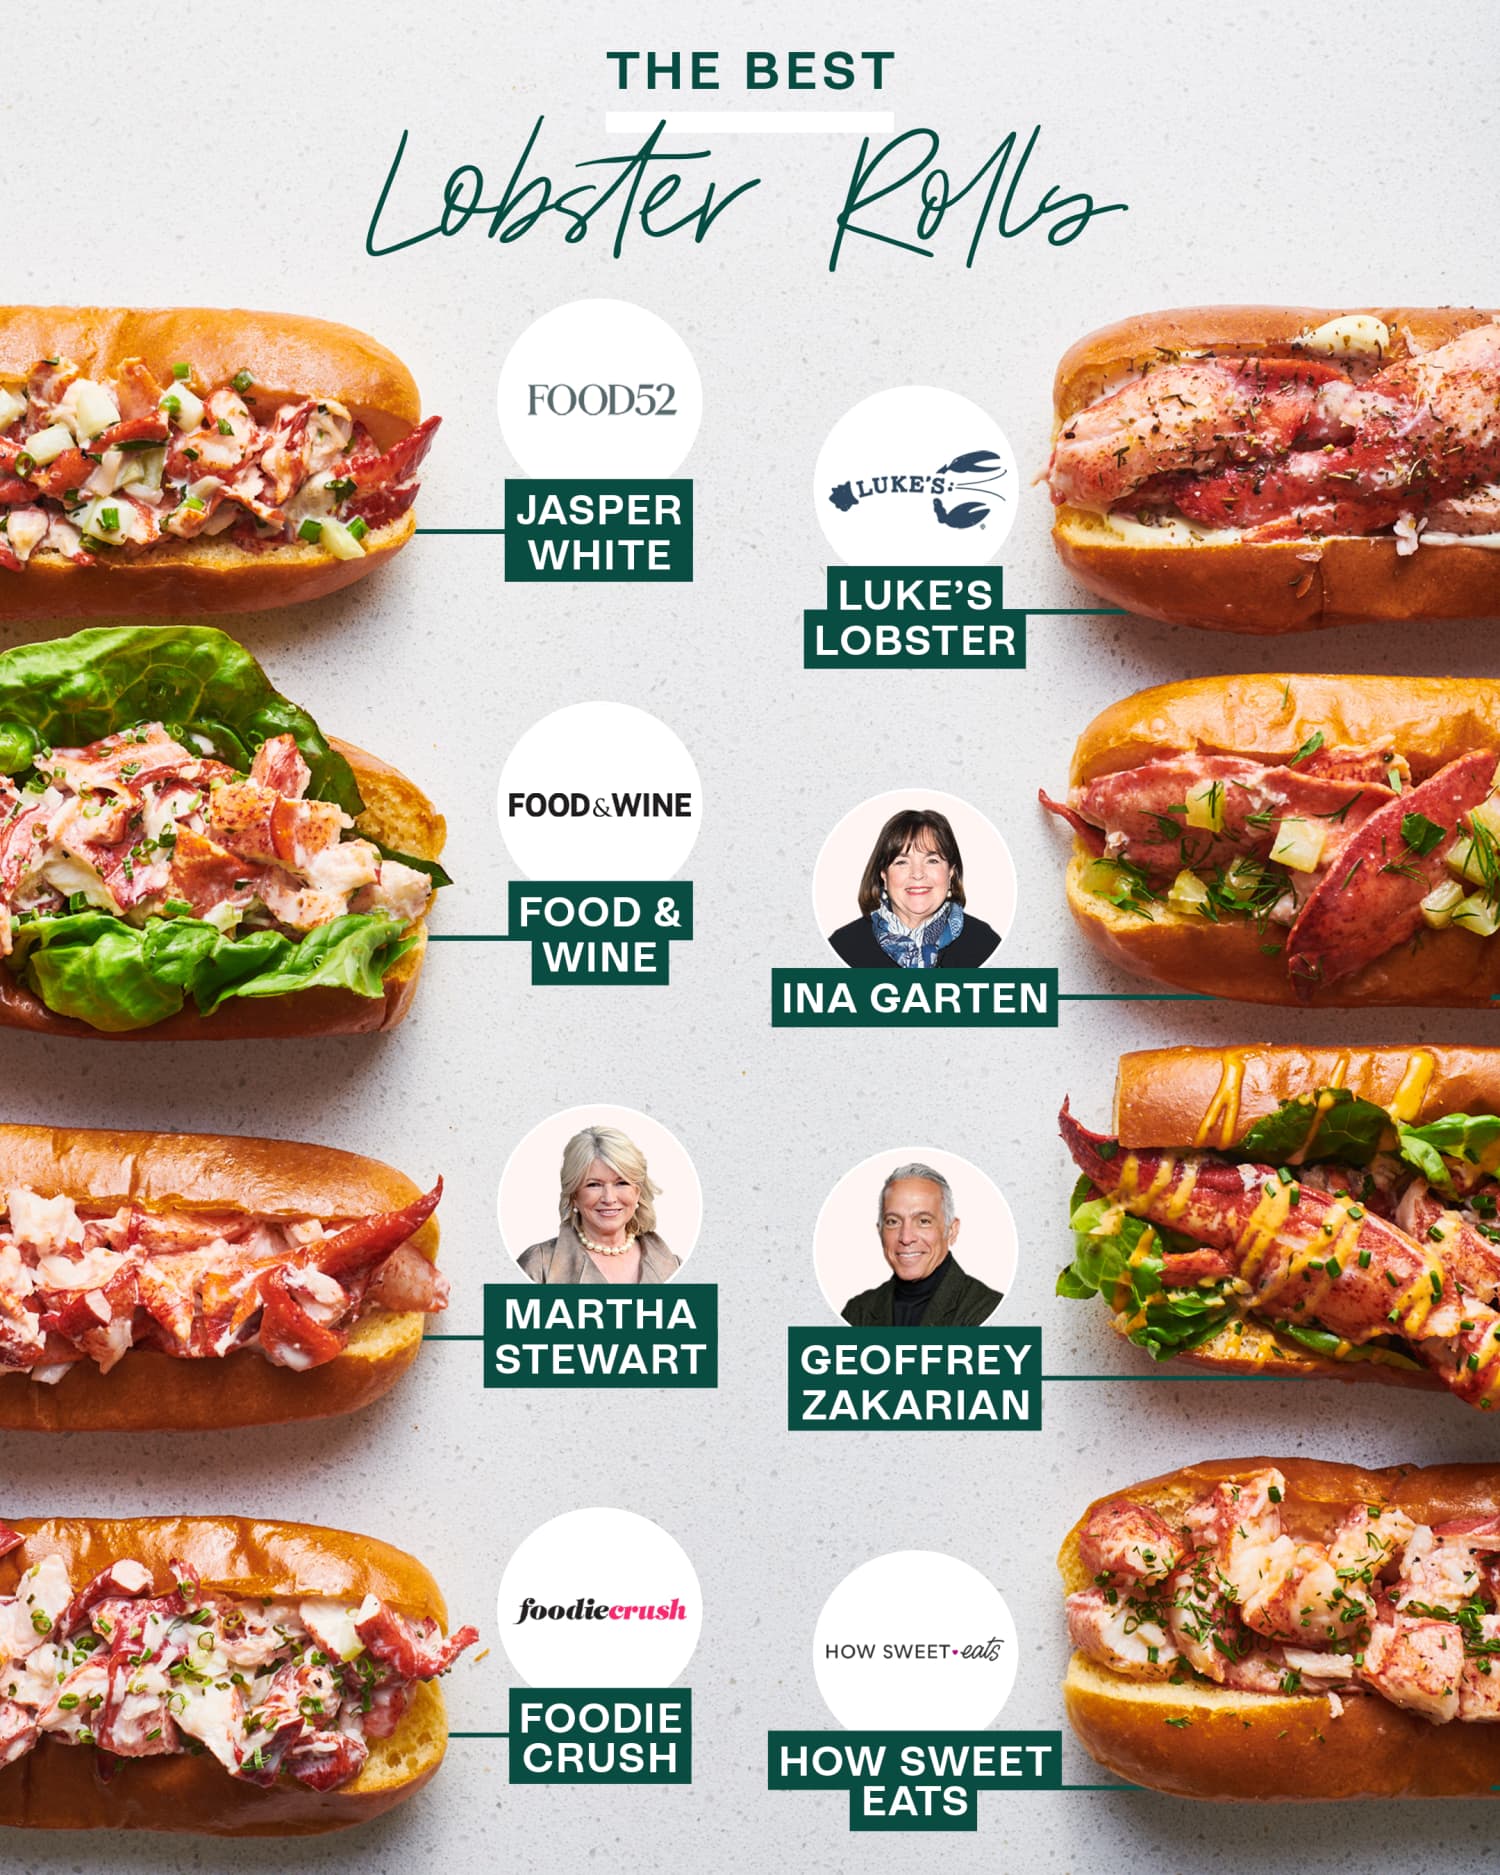 I Tried 8 Popular Lobster Roll Recipes and the Winner Blew Me Away